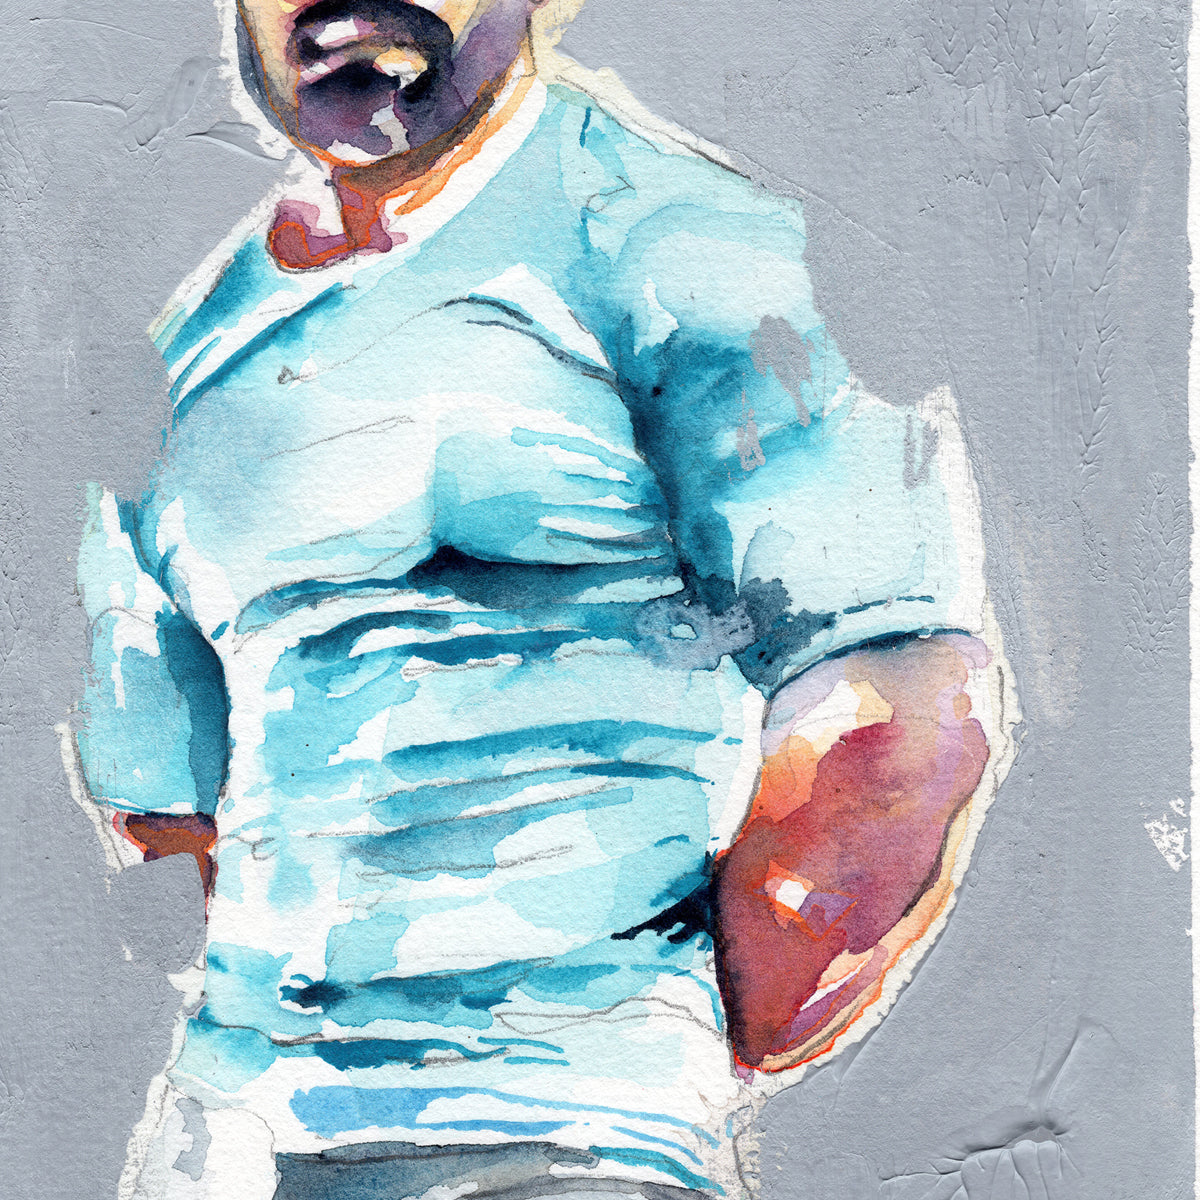 Bearded Man in Light Blue Shirt with Muscular Arms - 6x9" Original Watercolor Painting